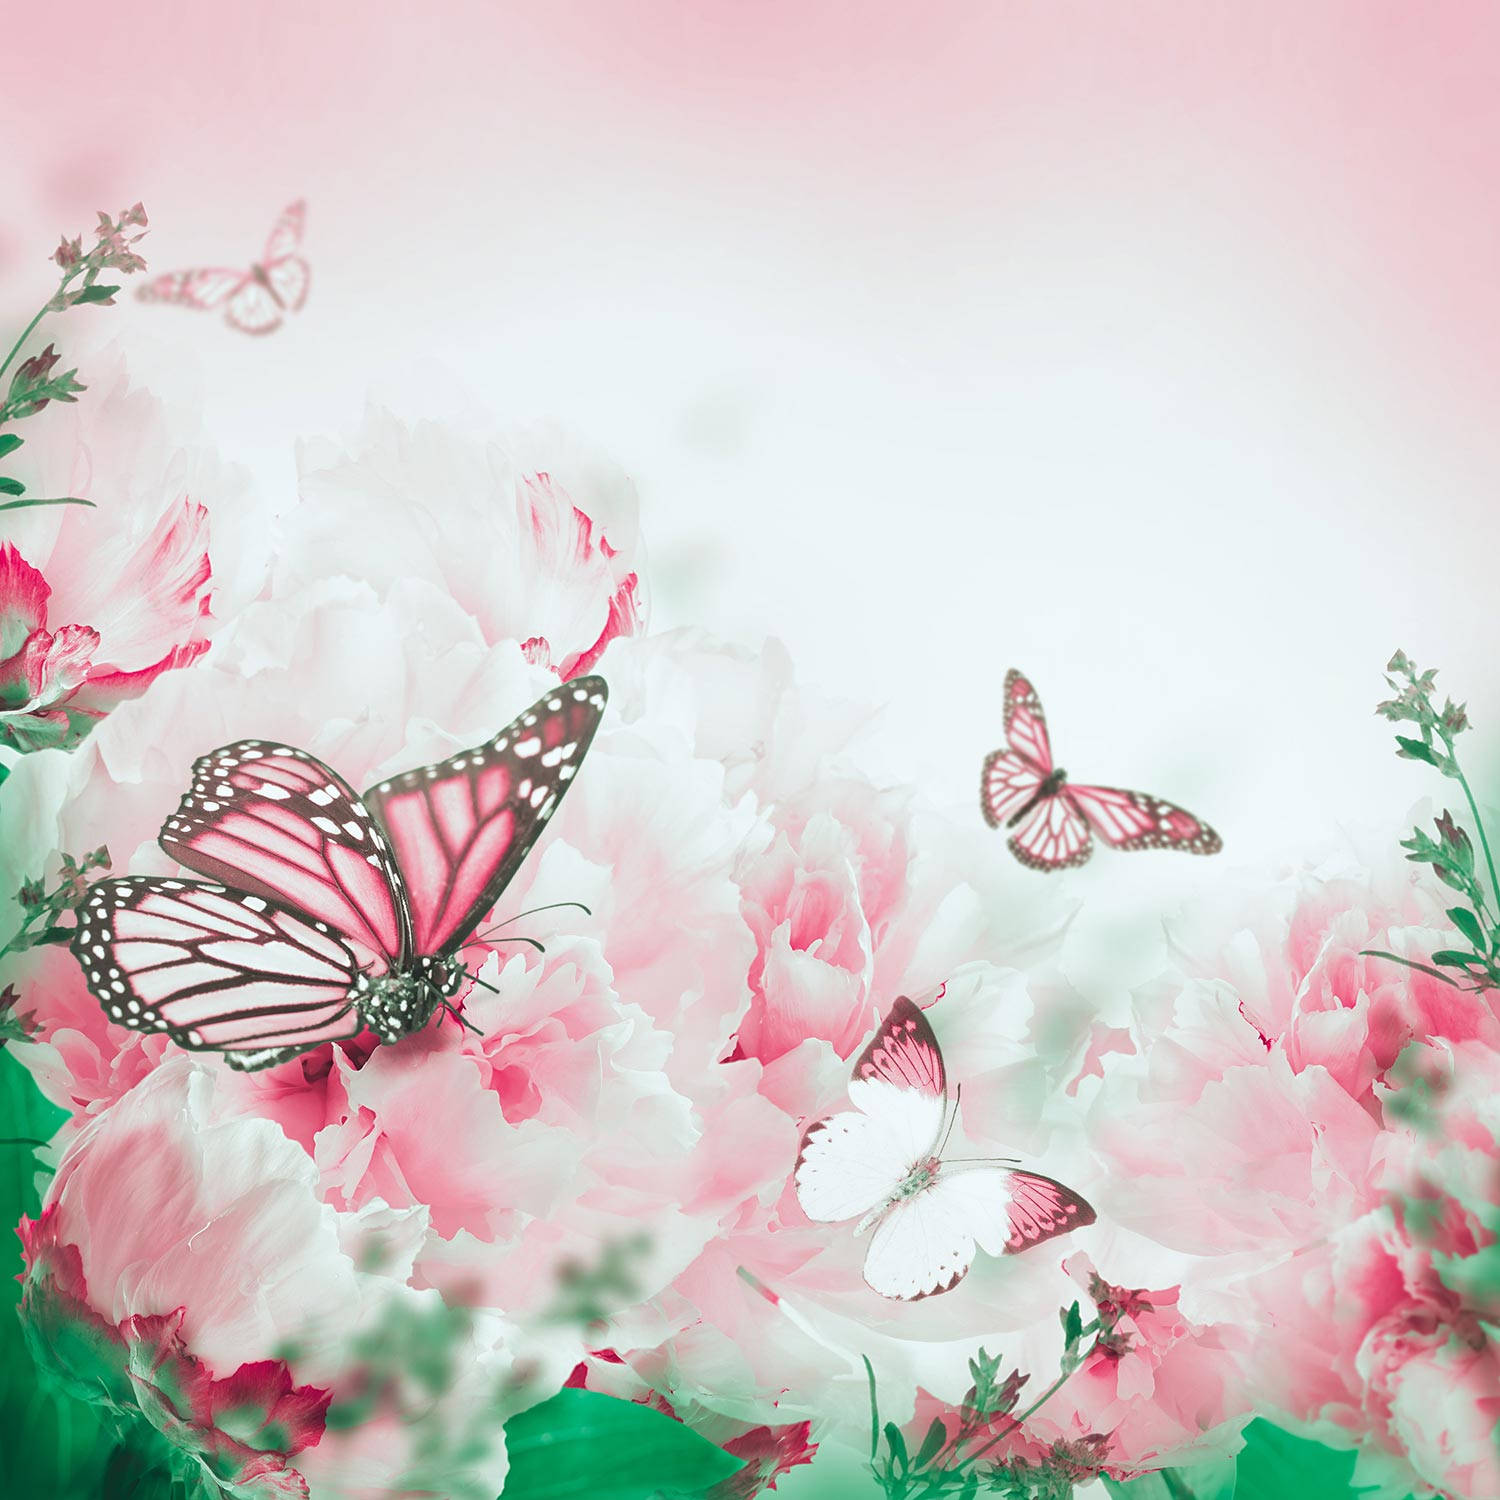 Glowing White And Cute Pink Butterfly Insects Wallpaper